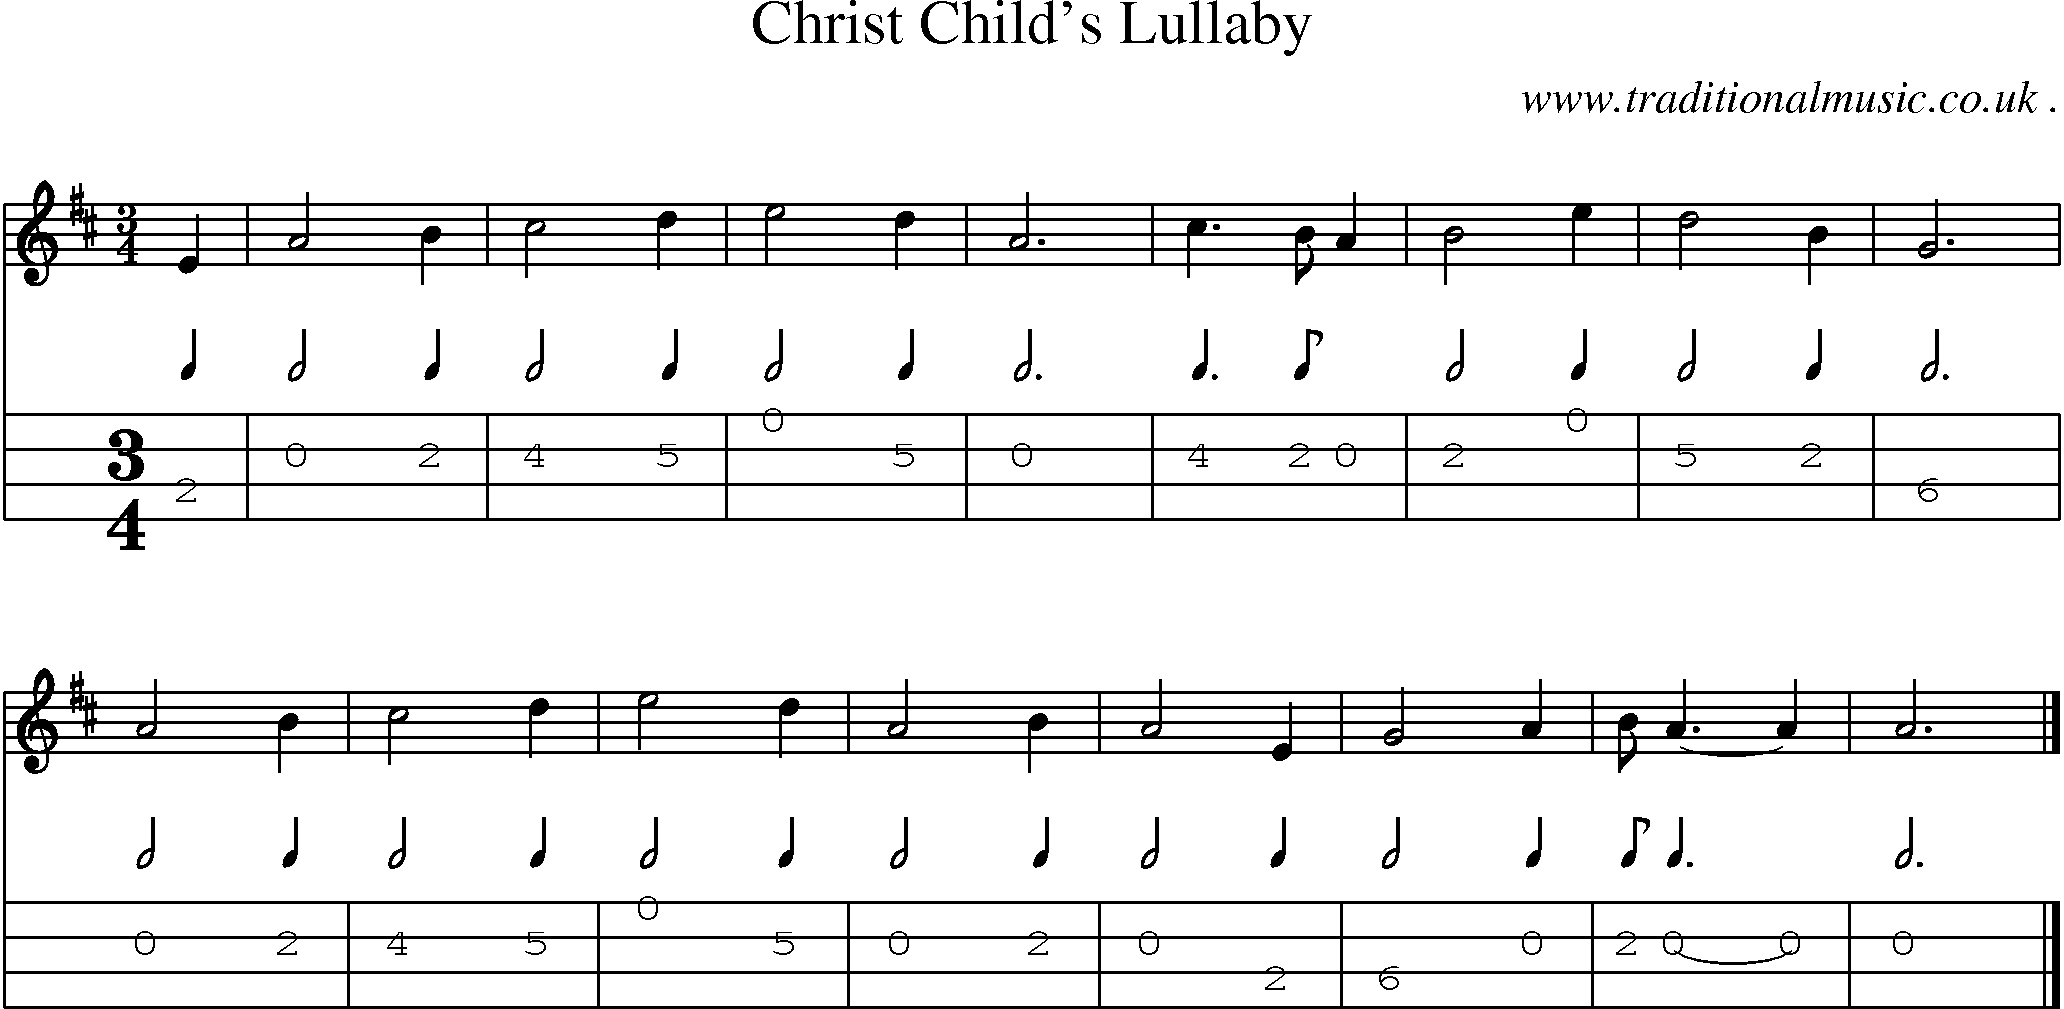 Sheet-music  score, Chords and Mandolin Tabs for Christ Childs Lullaby